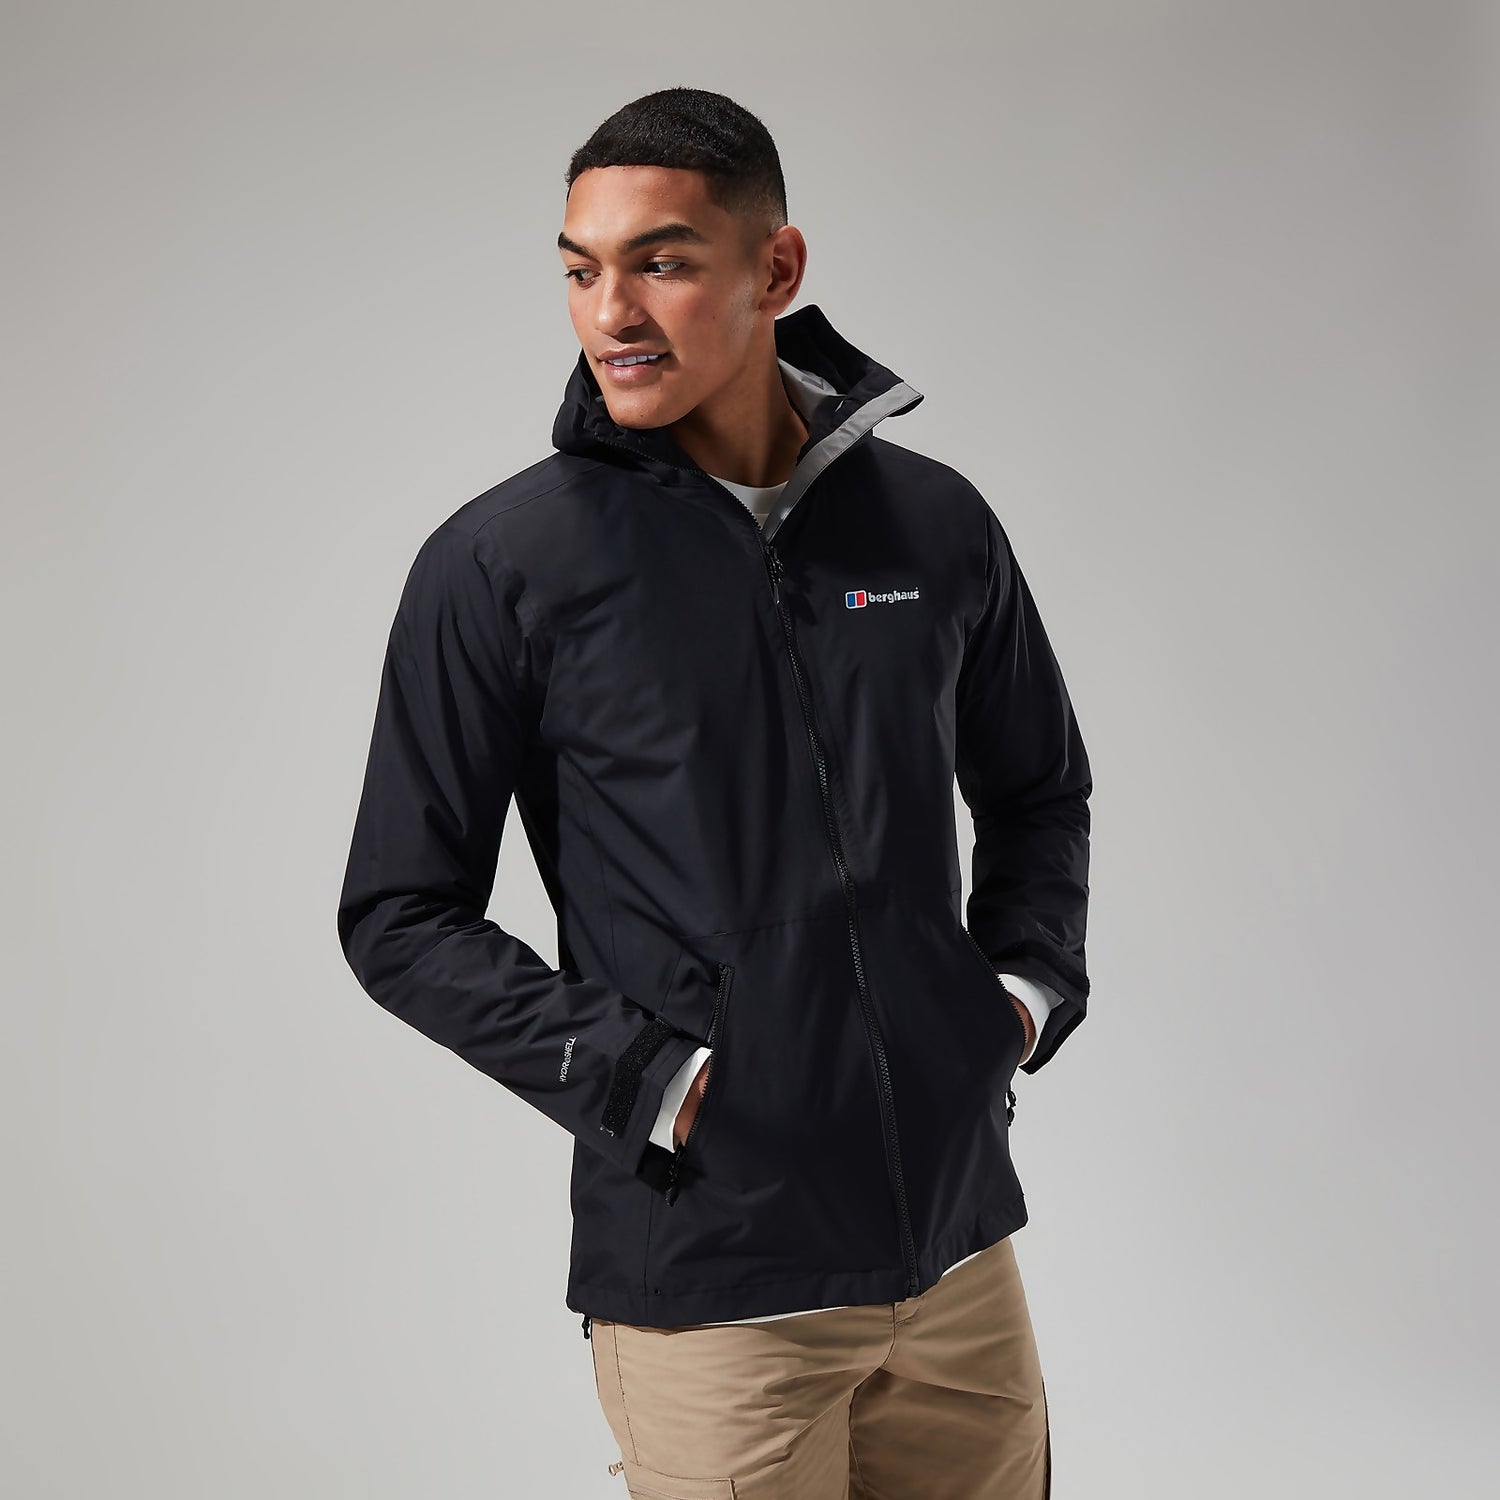 Unlock Wilderness' choice in the Berghaus Vs North Face comparison, the Deluge Pro 2.0 Jacket - Black by Berghaus